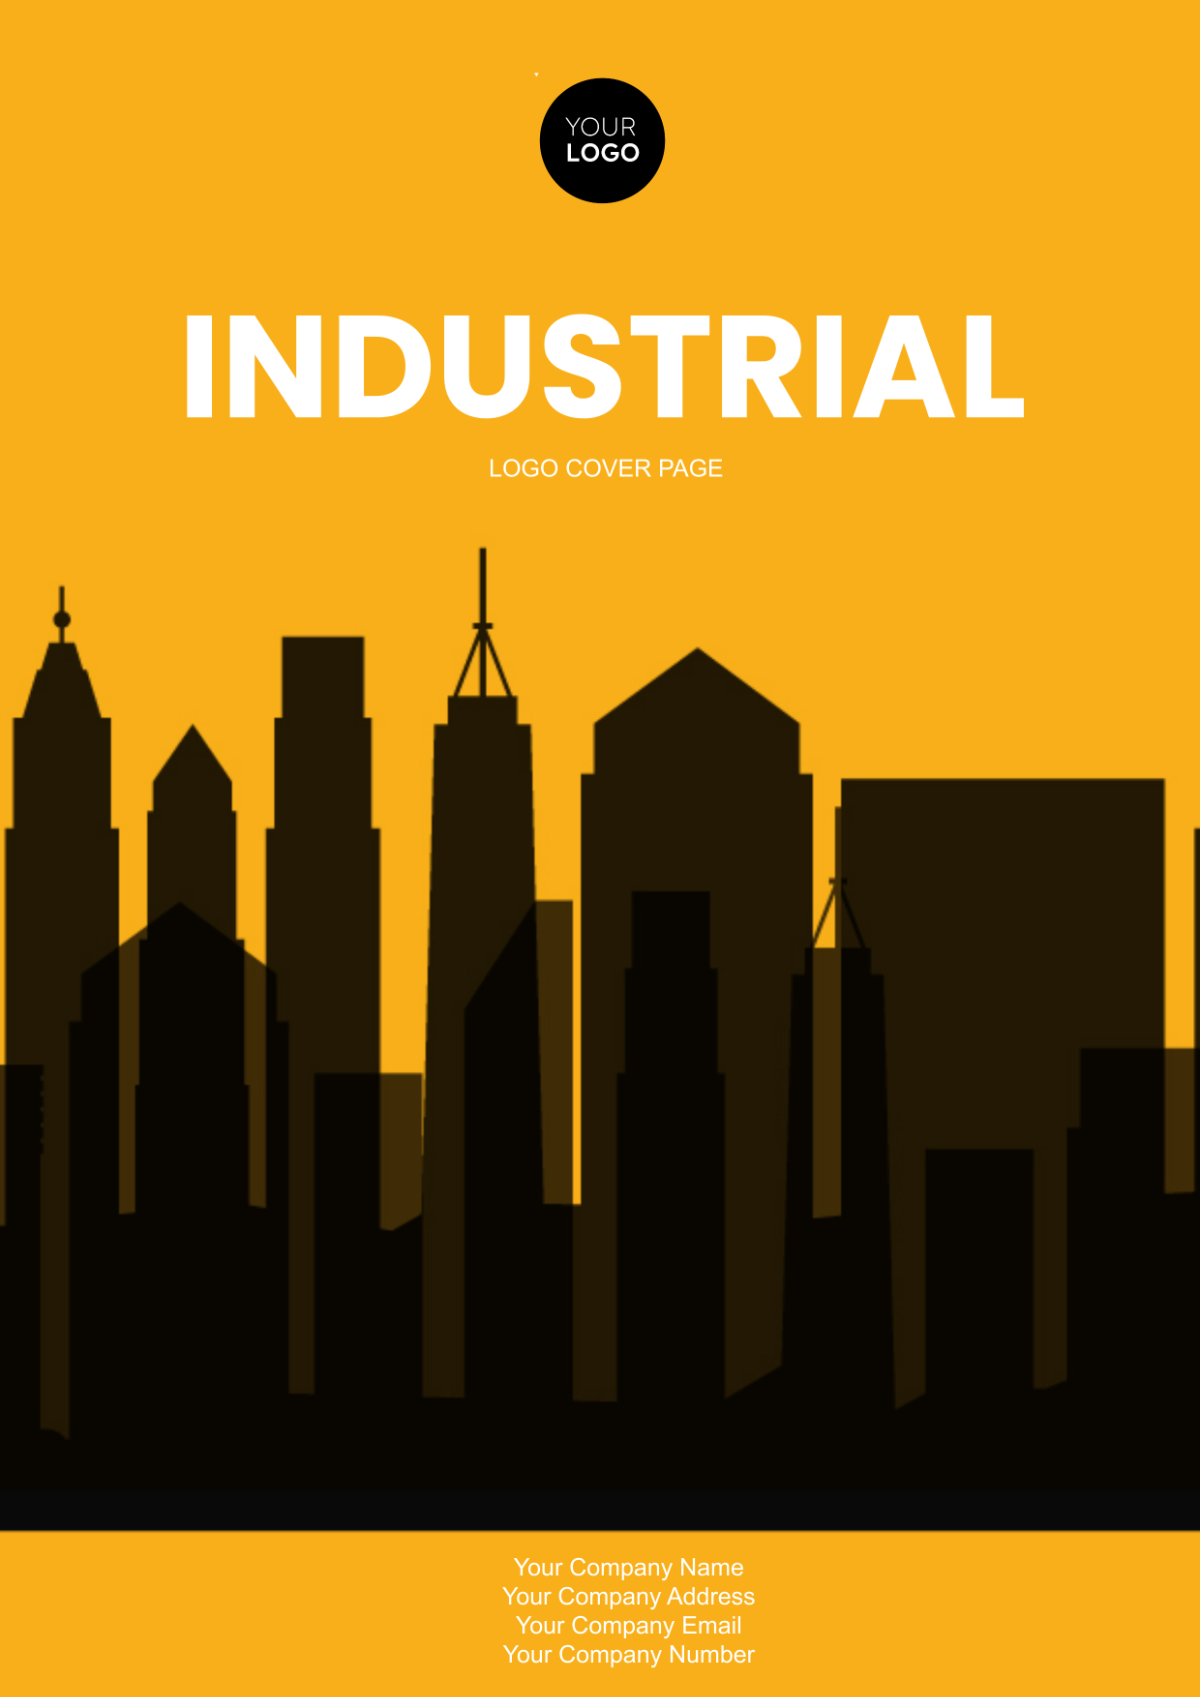 Industrial Logo Cover Page